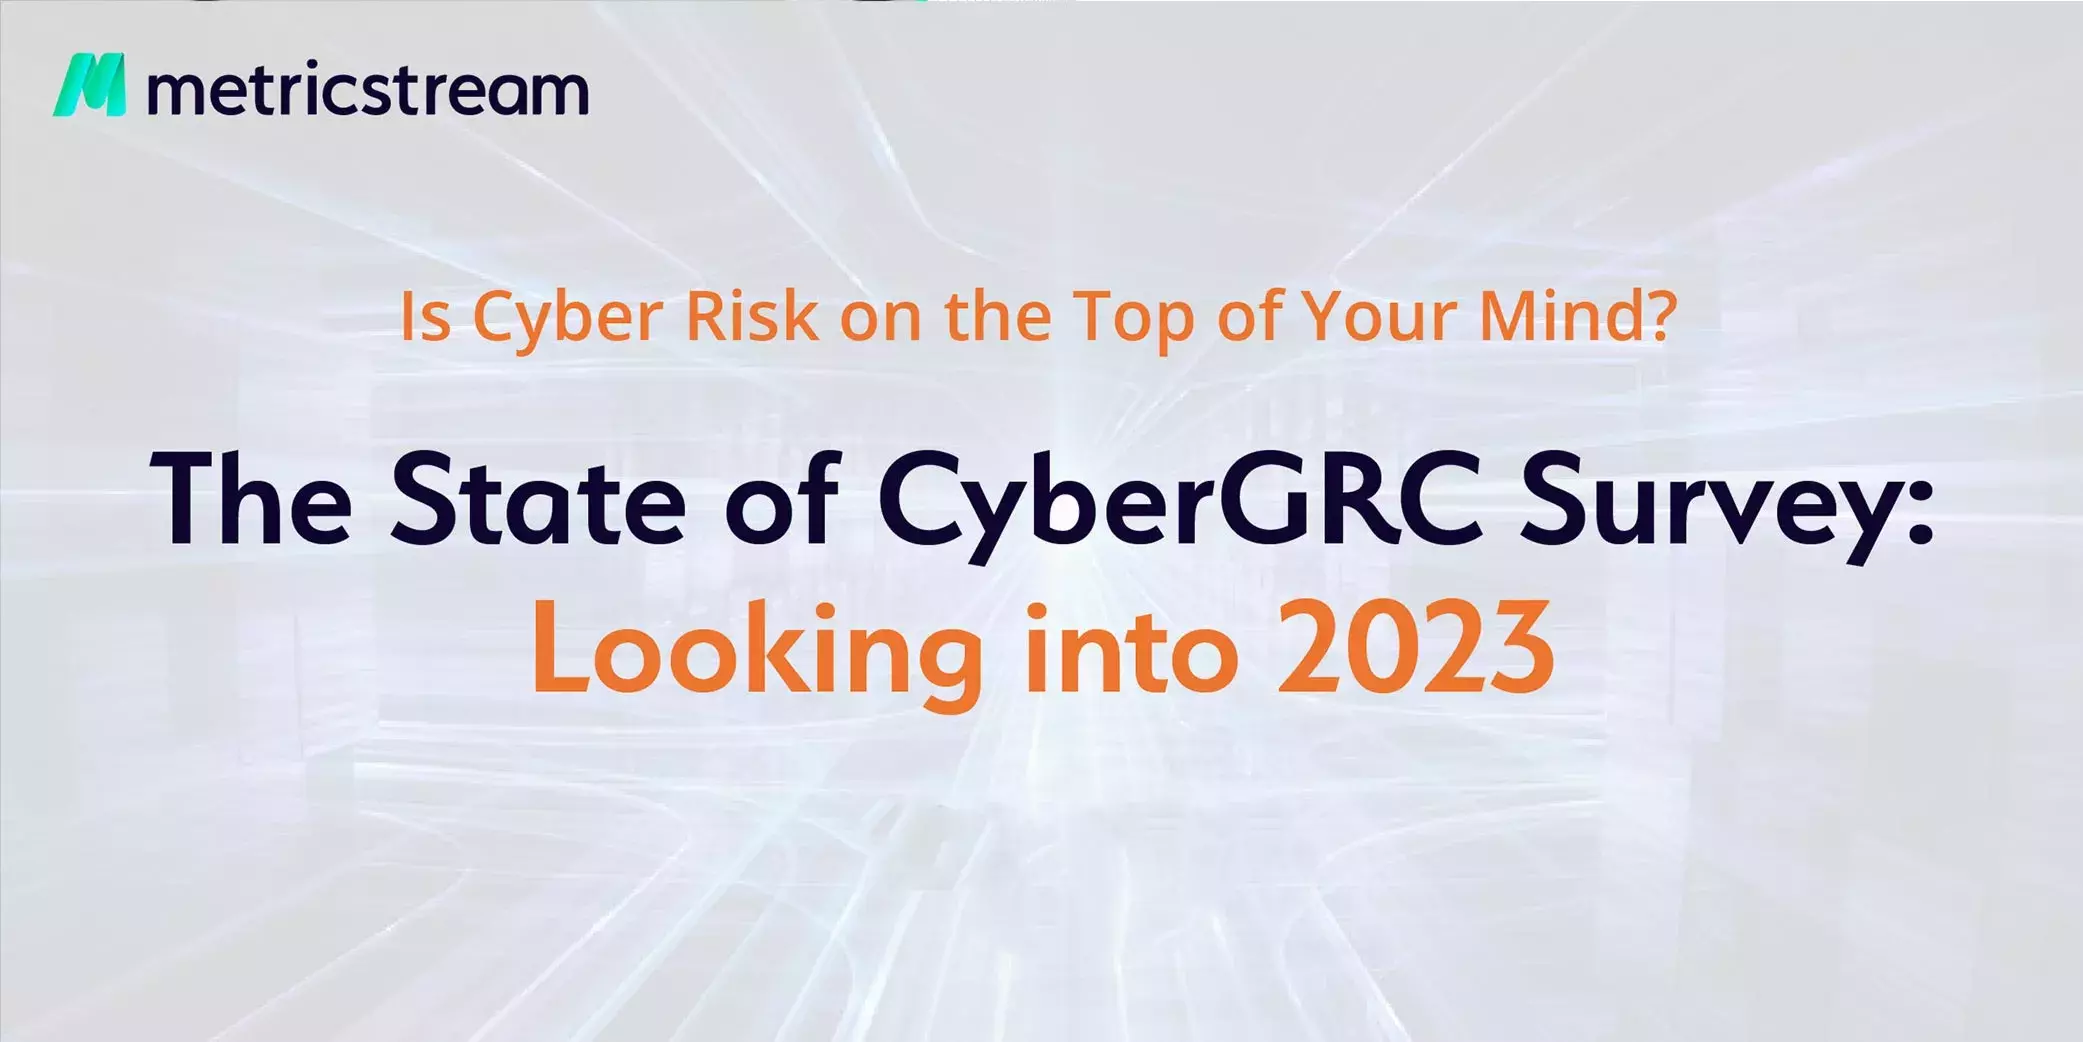 5 Reasons to Take the State of CyberGRC Survey